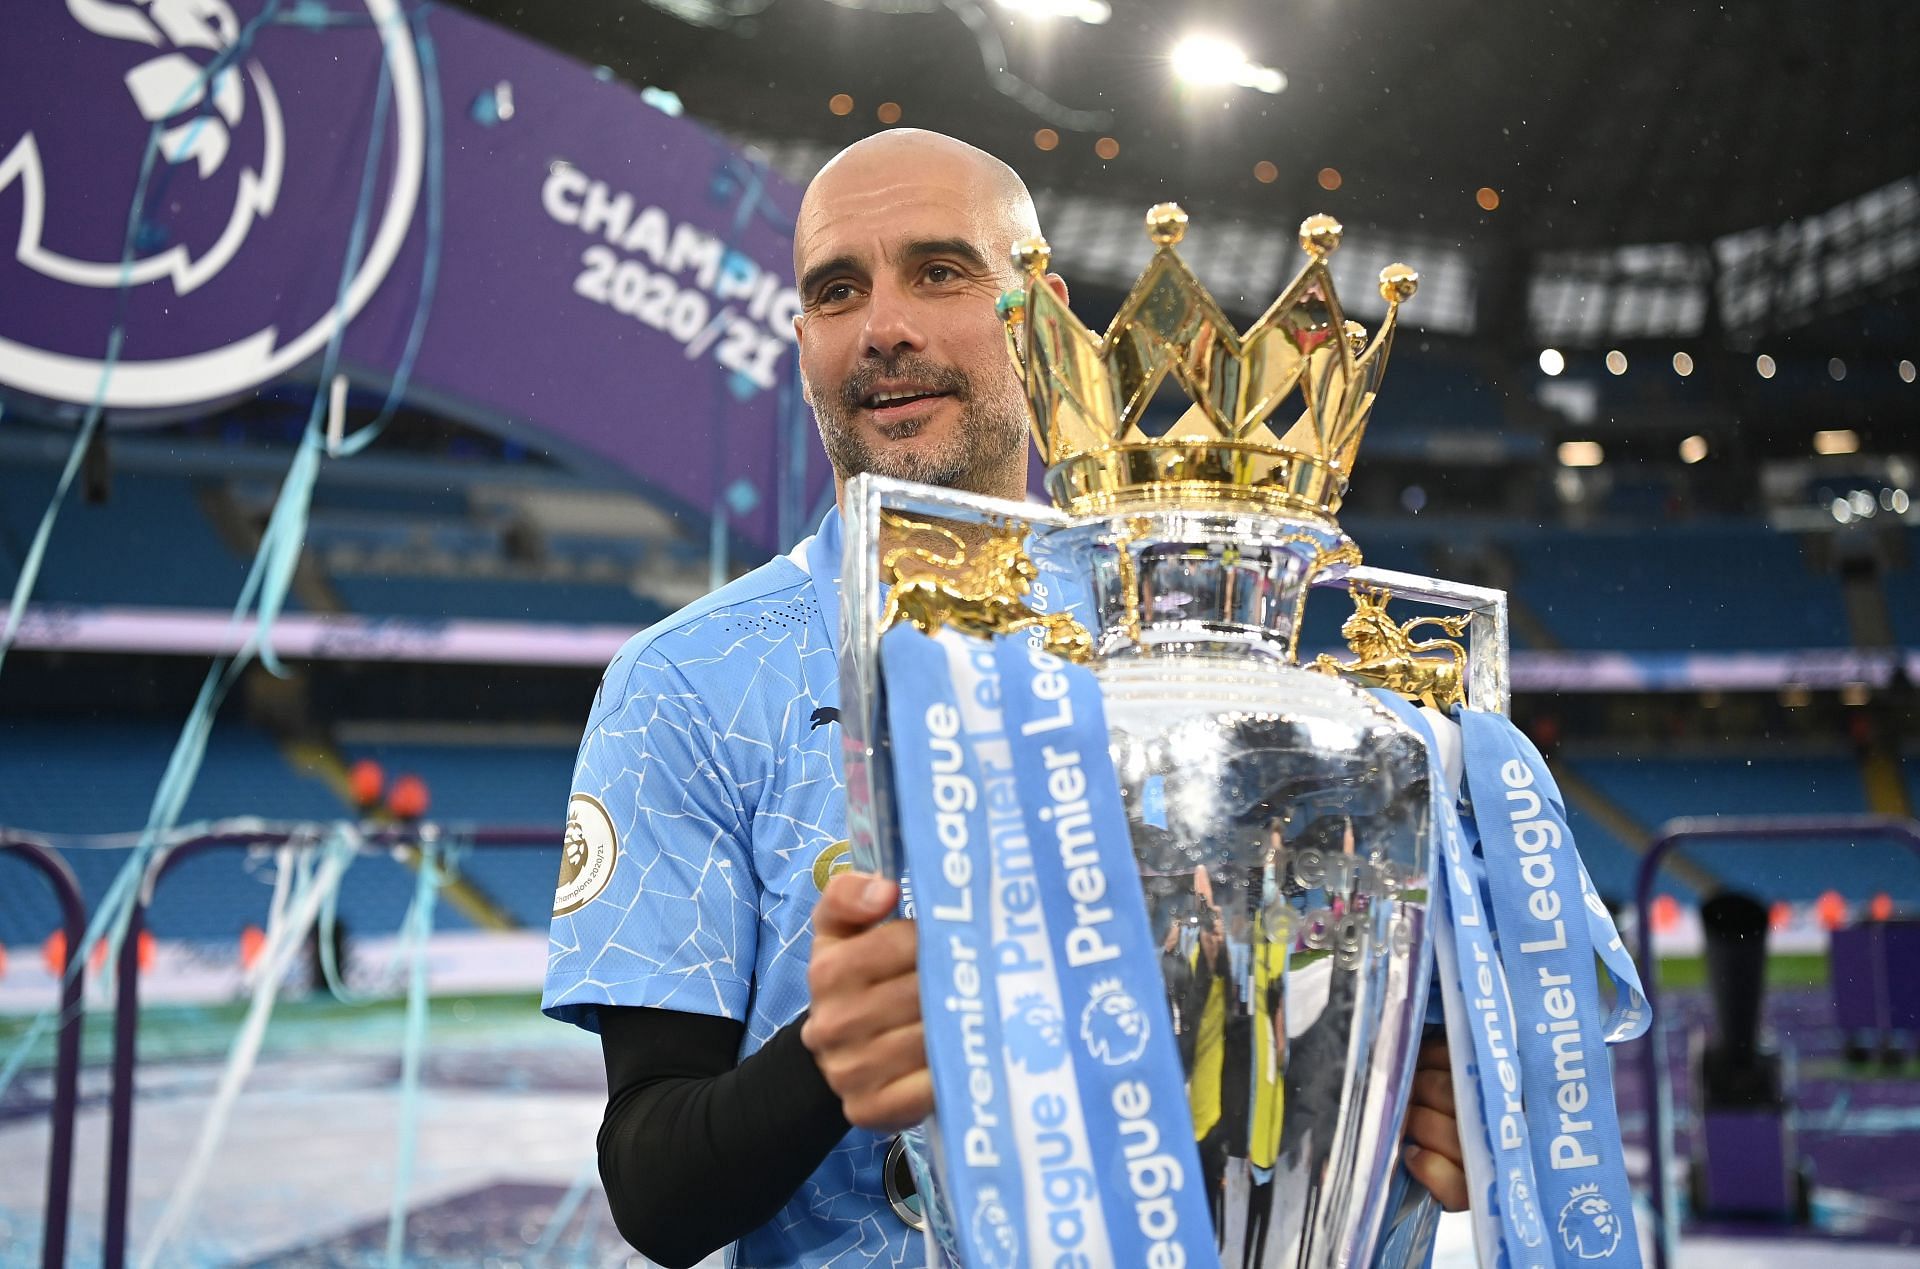 Pep Guardiola is one of the greatest managers in Premier League history.